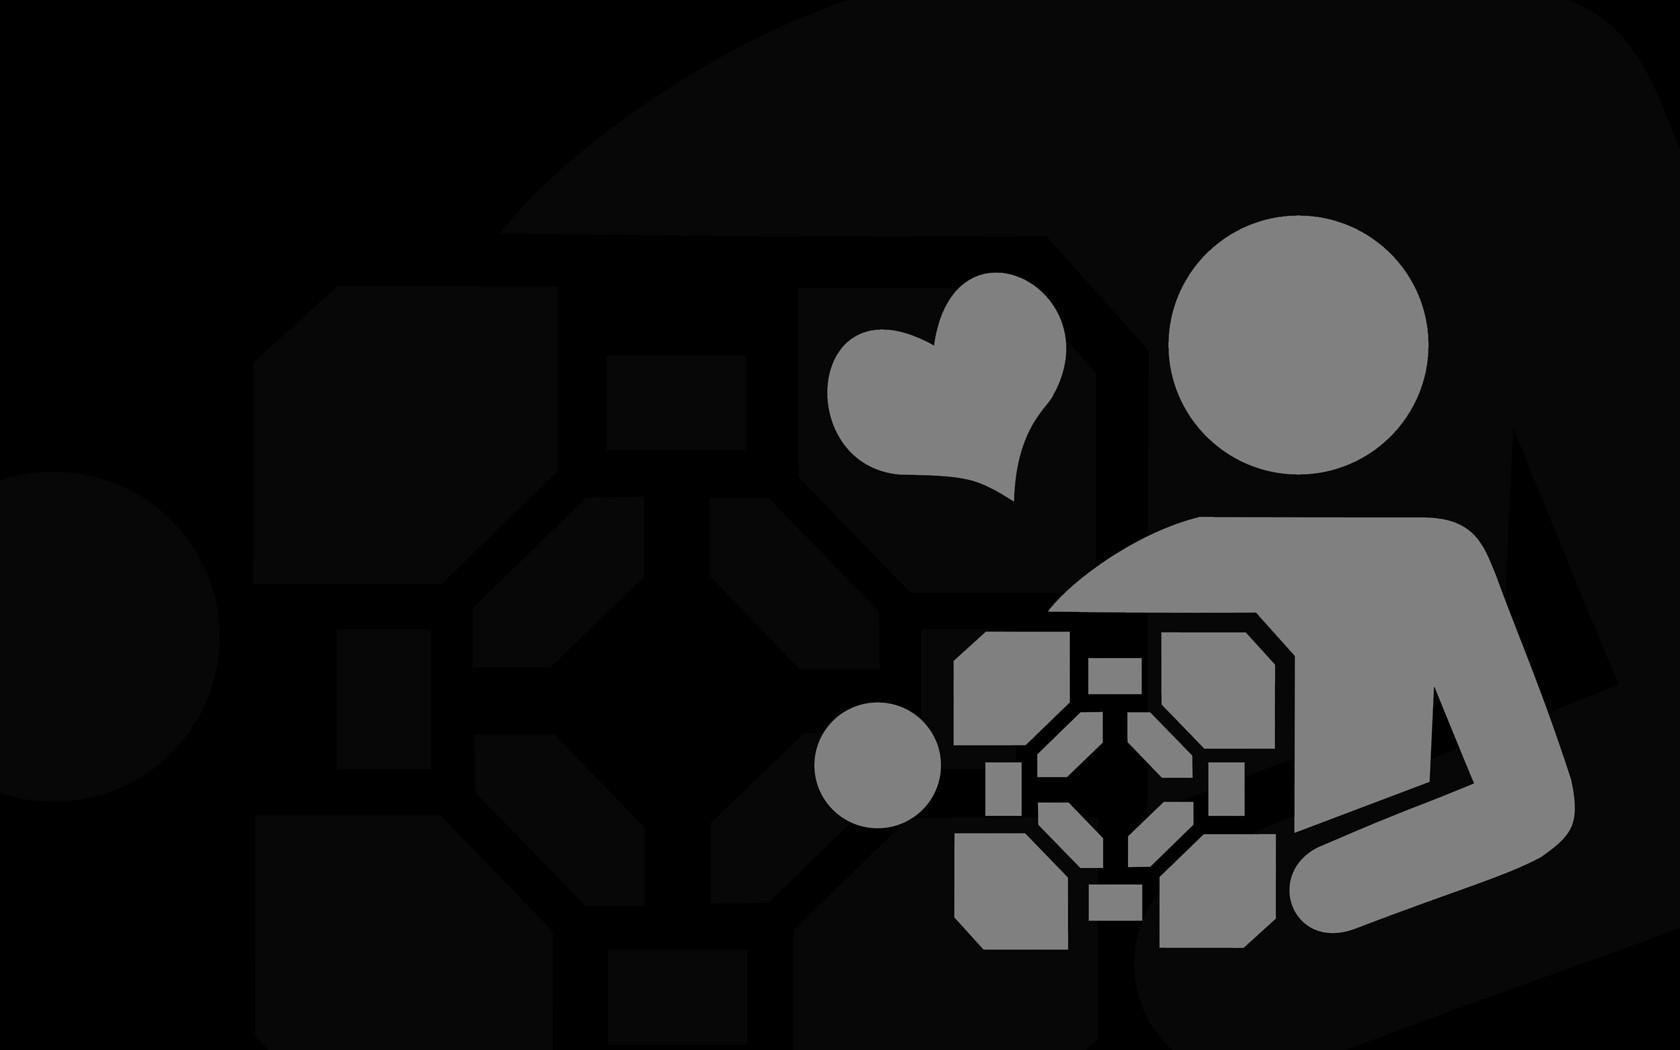 General 1680x1050 Portal (game) minimalism Companion Cube video games video game art PC gaming simple background black background heart (design)